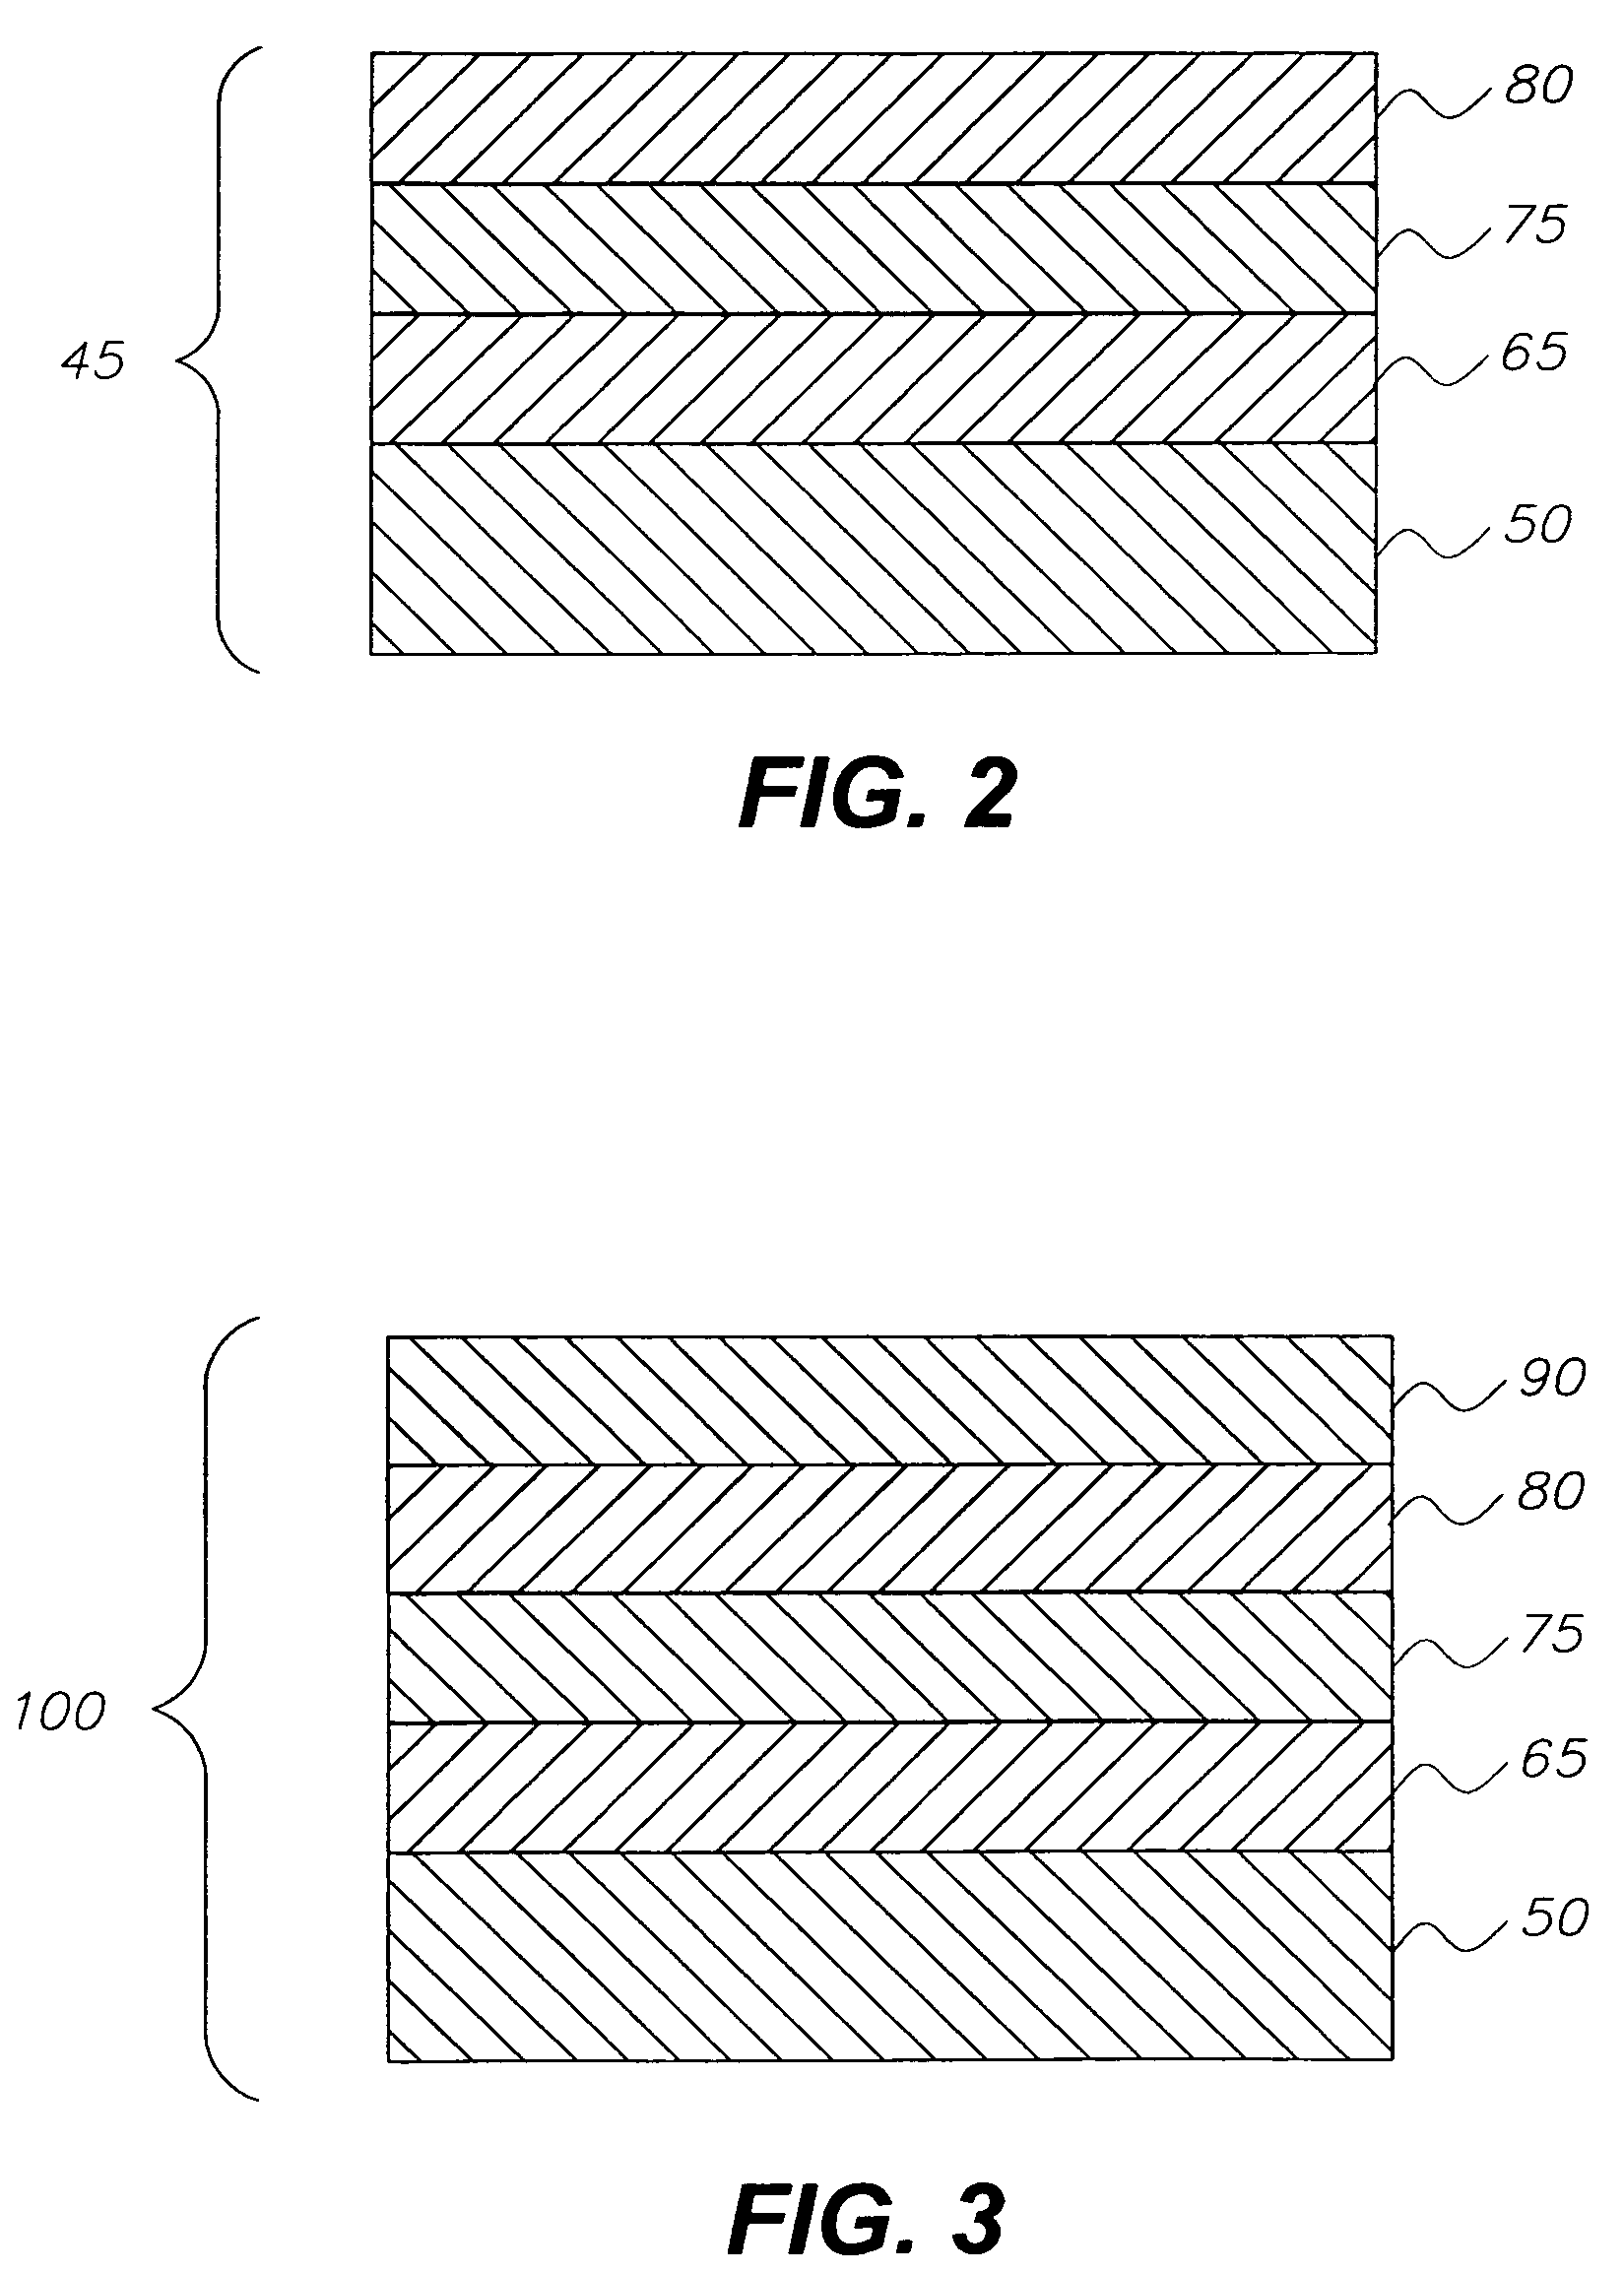 Forming a patterned metal layer using laser induced thermal transfer method